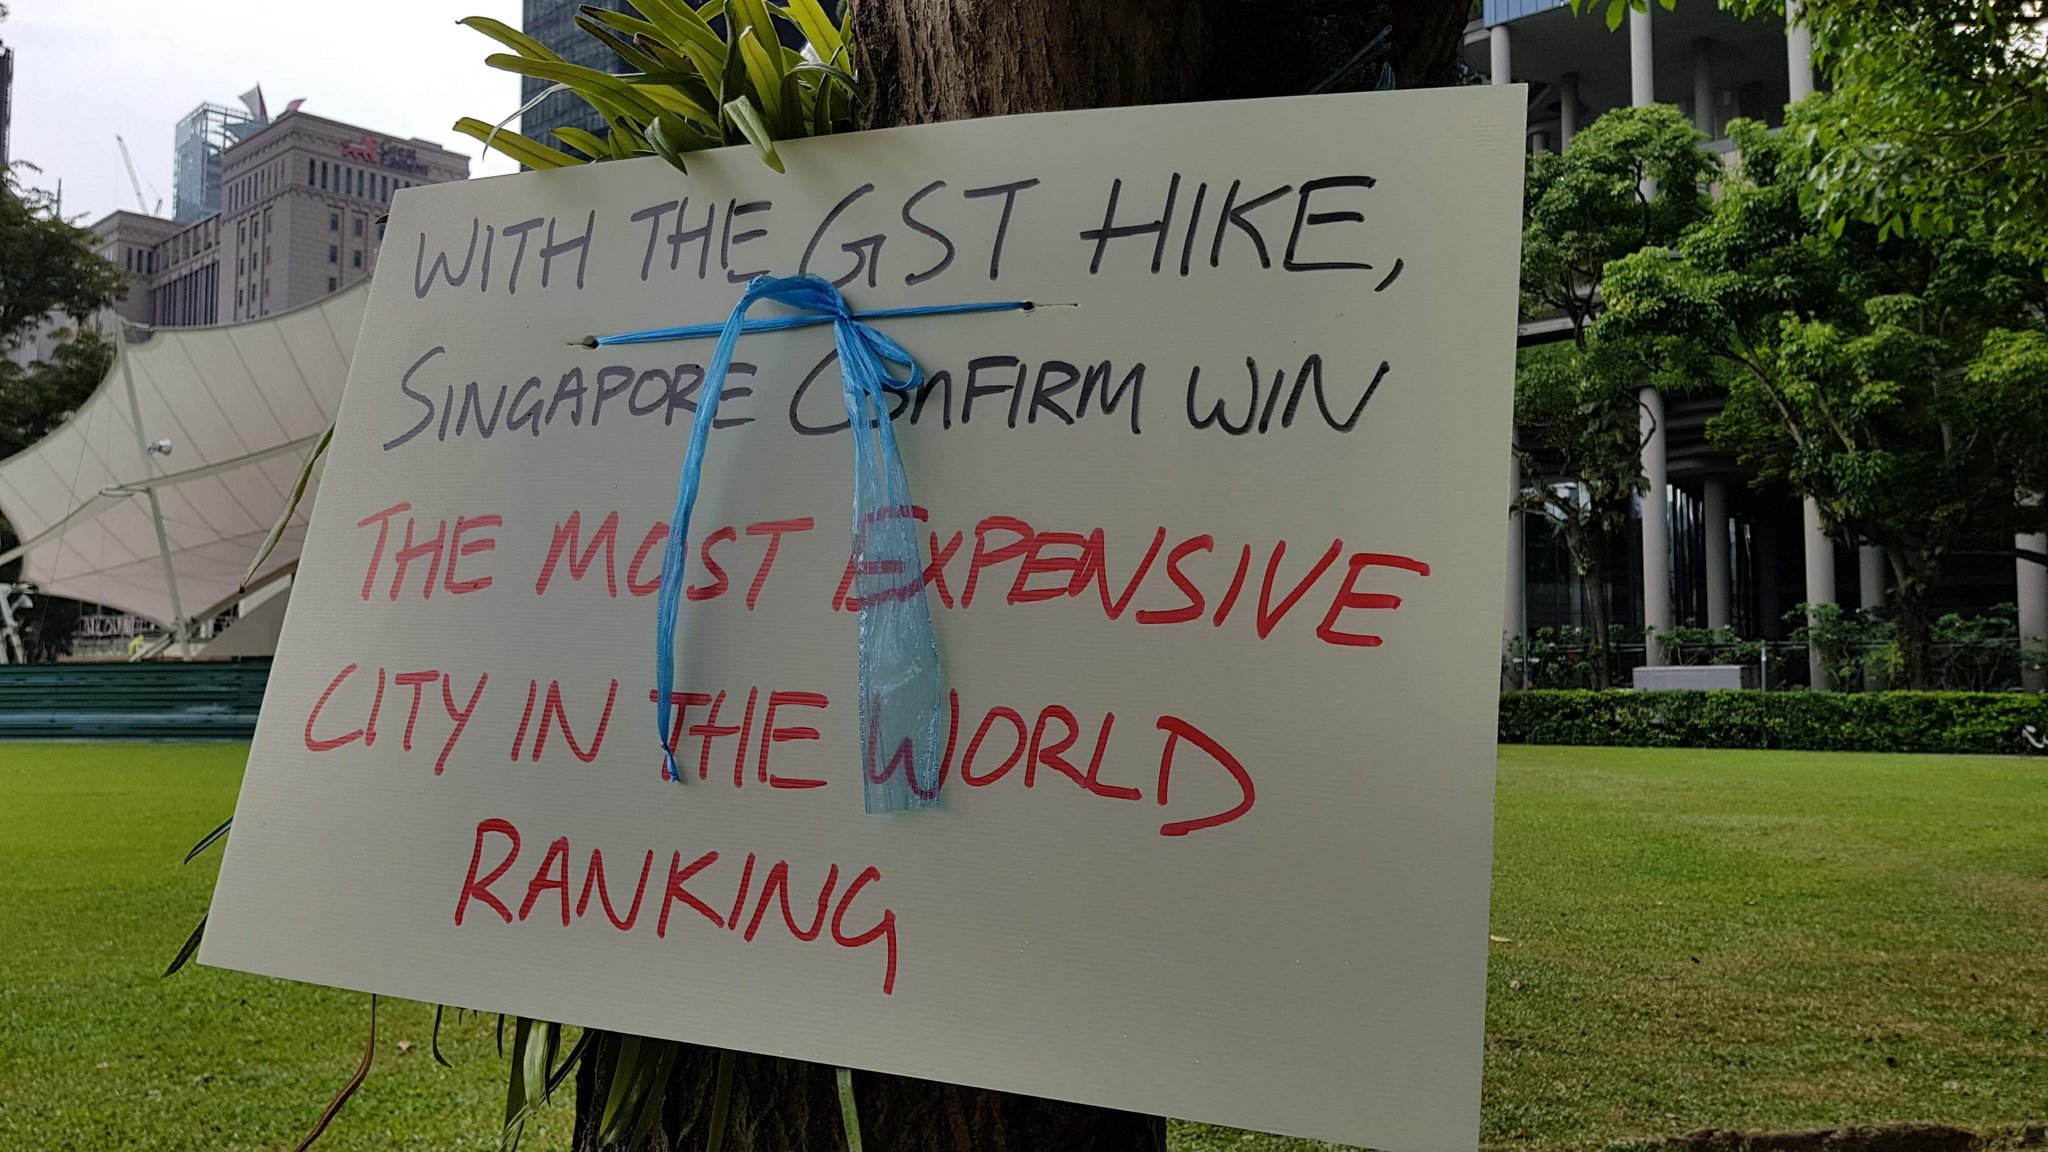 A picture of a sign from a protest against the planned GST increase. It reads "With the GST hike, Singapore confirm win the most expensive city in the world ranking"